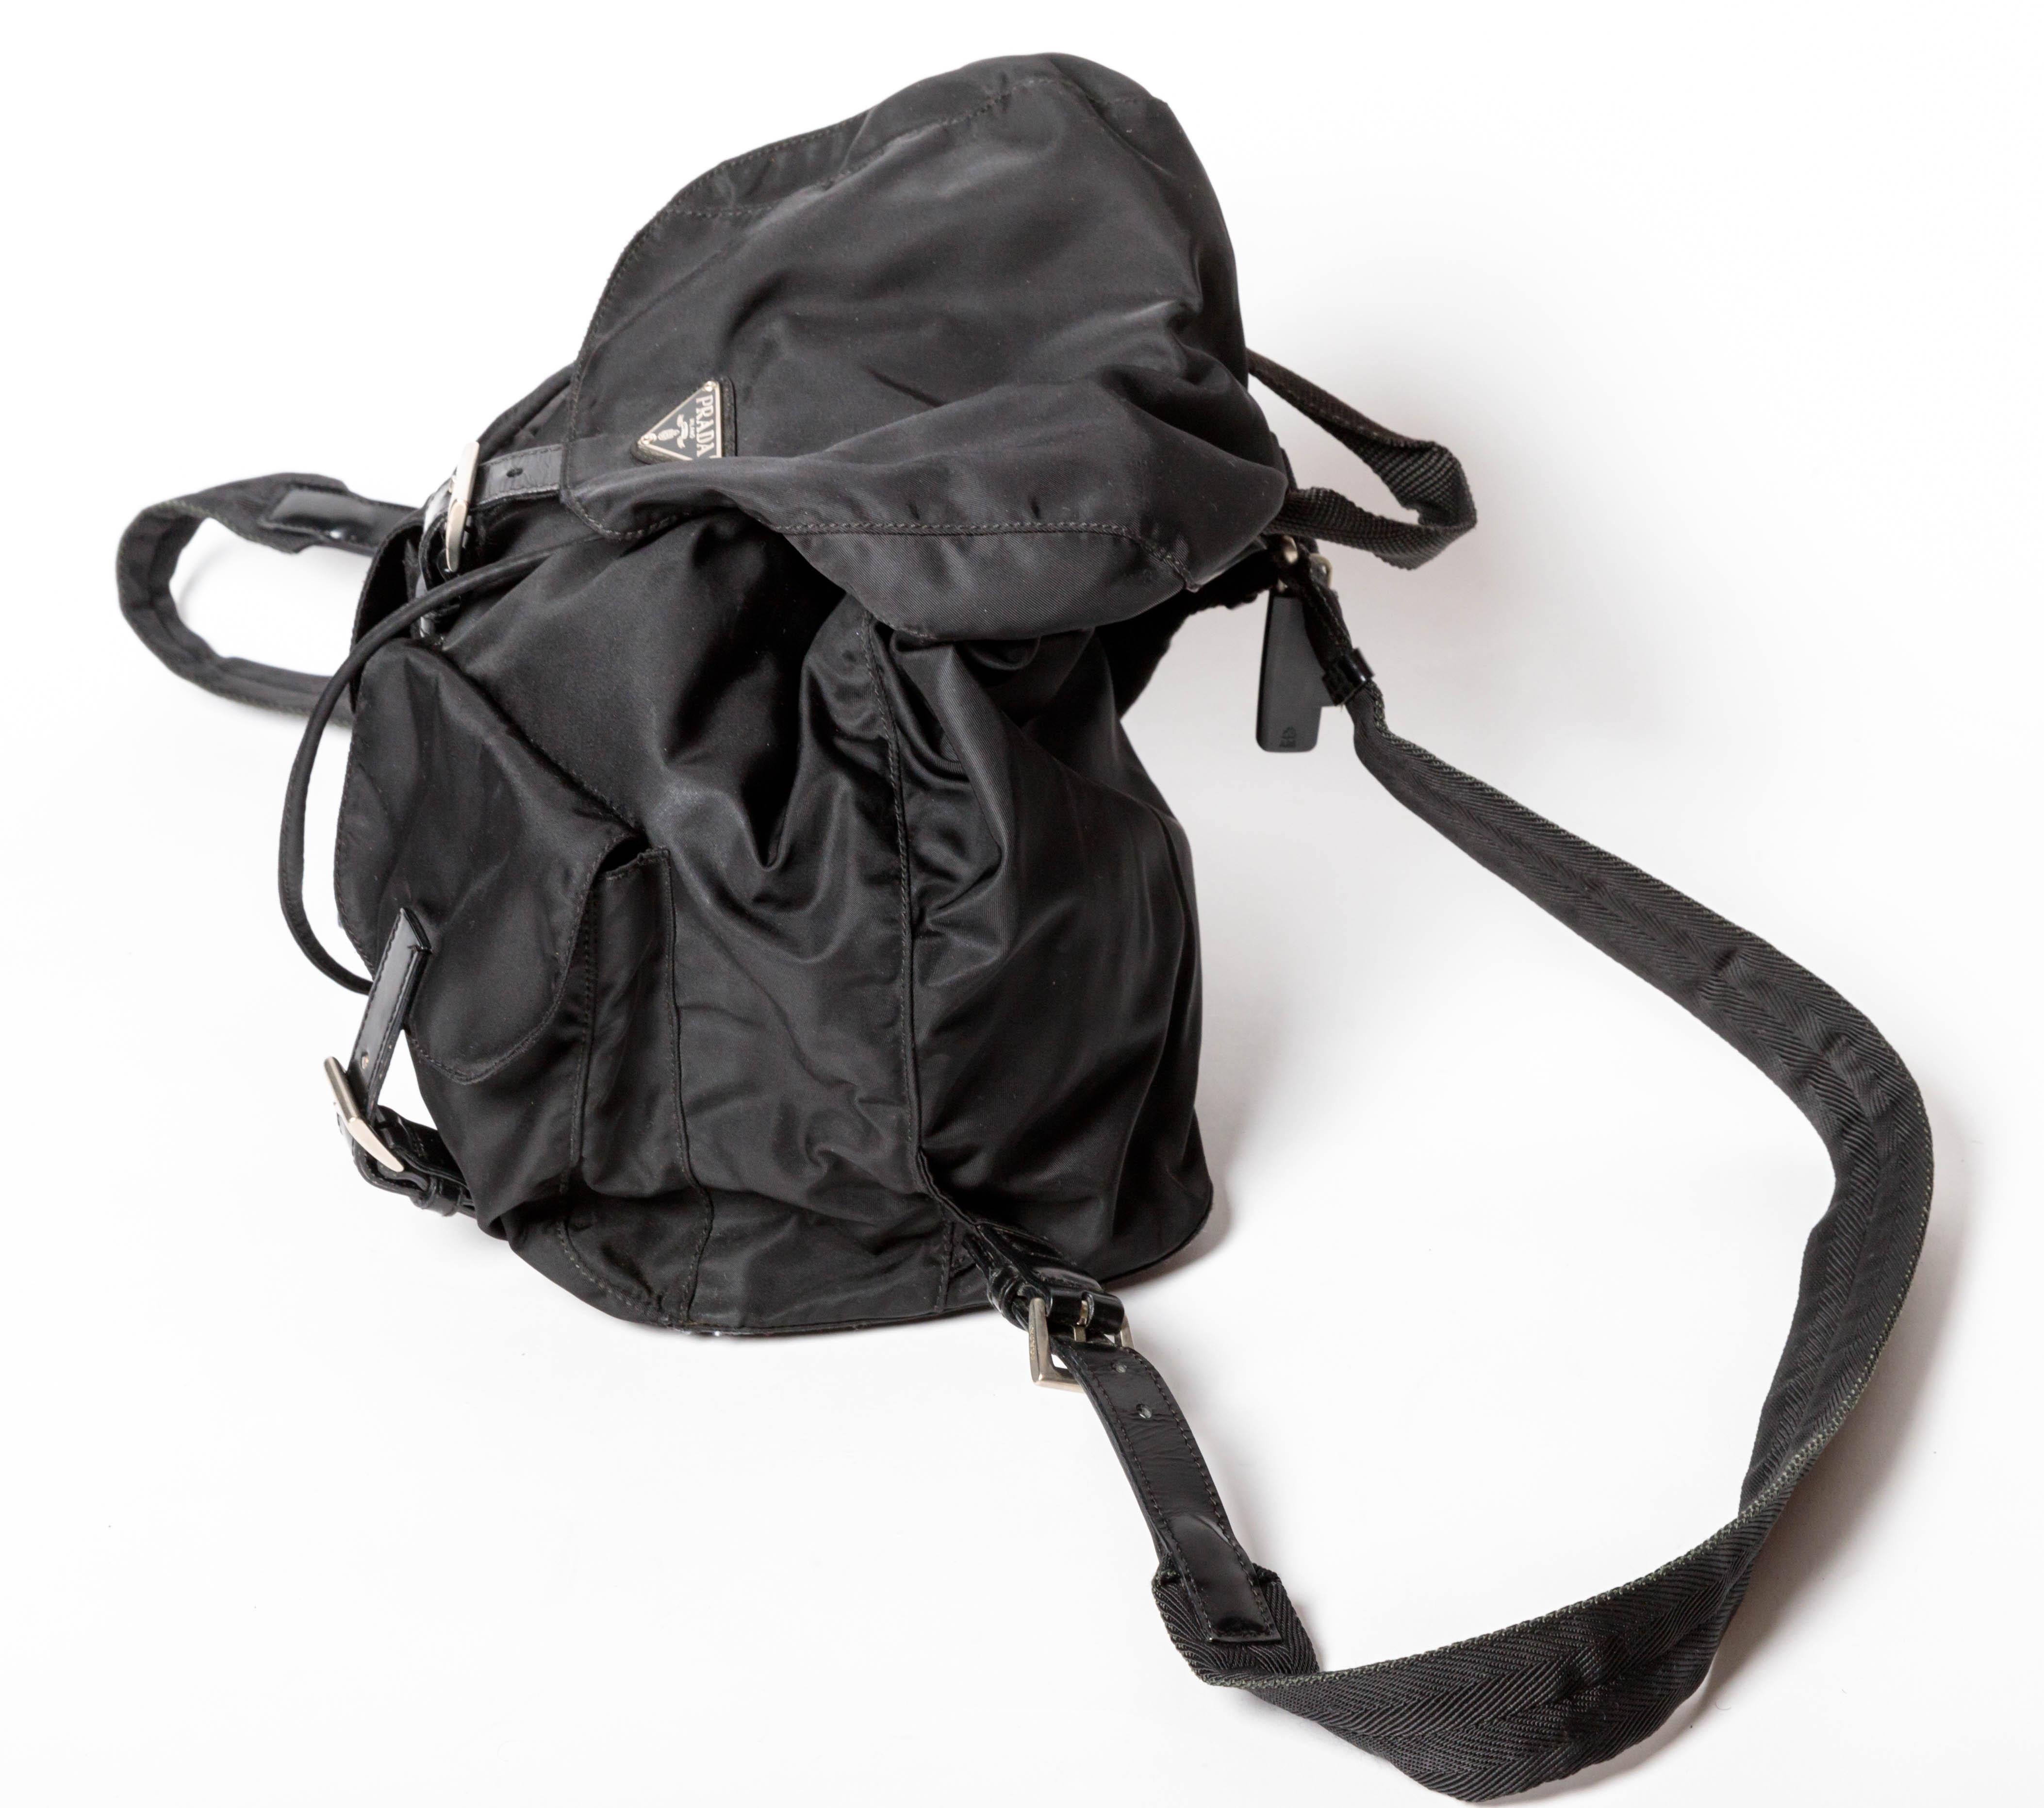 This is the perfect Prada backpack. 
Nylon with two front buckle pockets, this backpack can be opened using the toggle closure. A snap and buckle secure the main part of the backpack which has one interior zip pocket. in place. Canvas straps and top